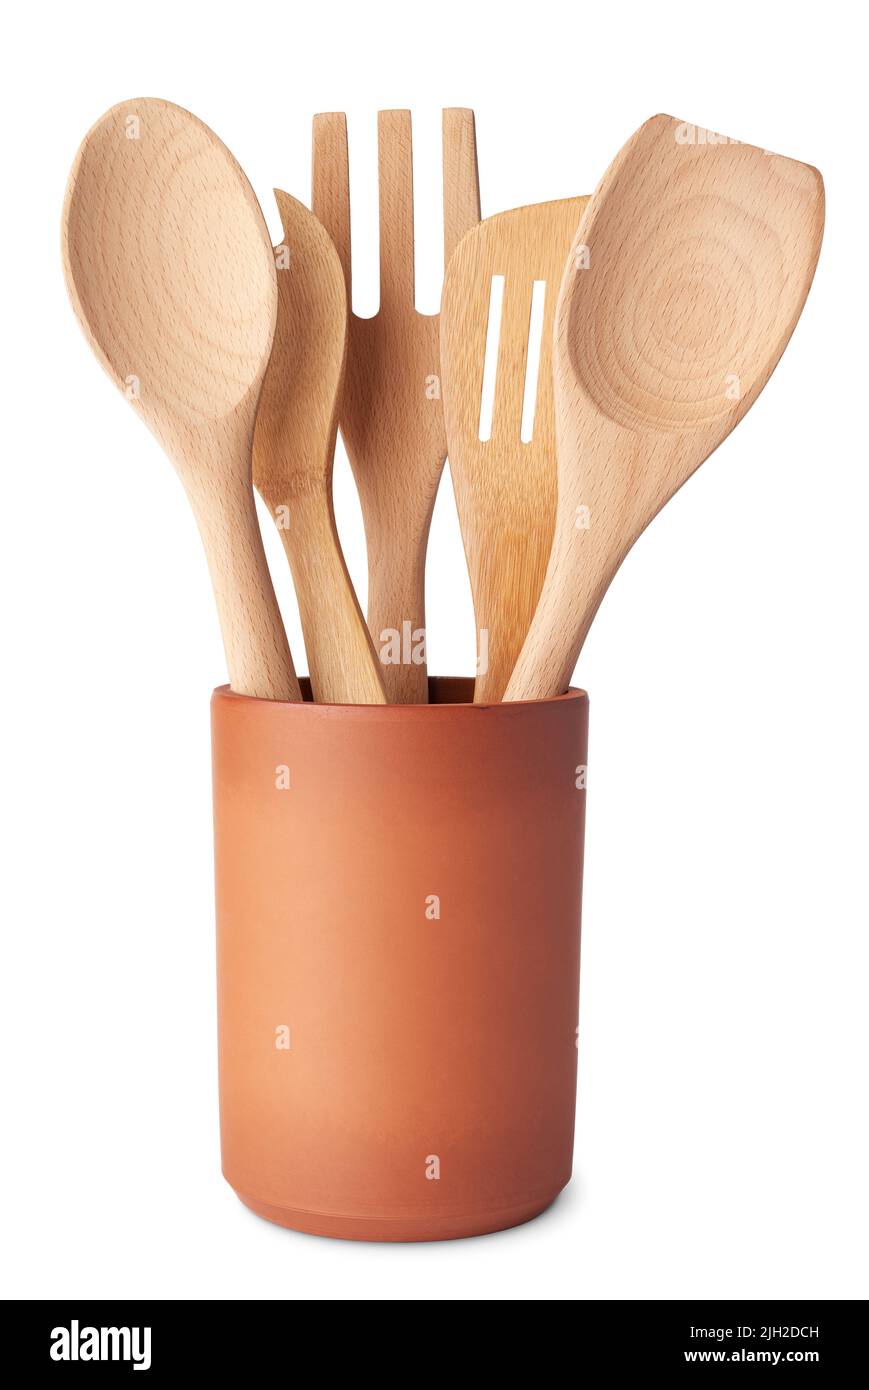 Set of wooden kitchen utensils, spoon, fork and spatula, in a terracotta container, isolated on white background Stock Photo